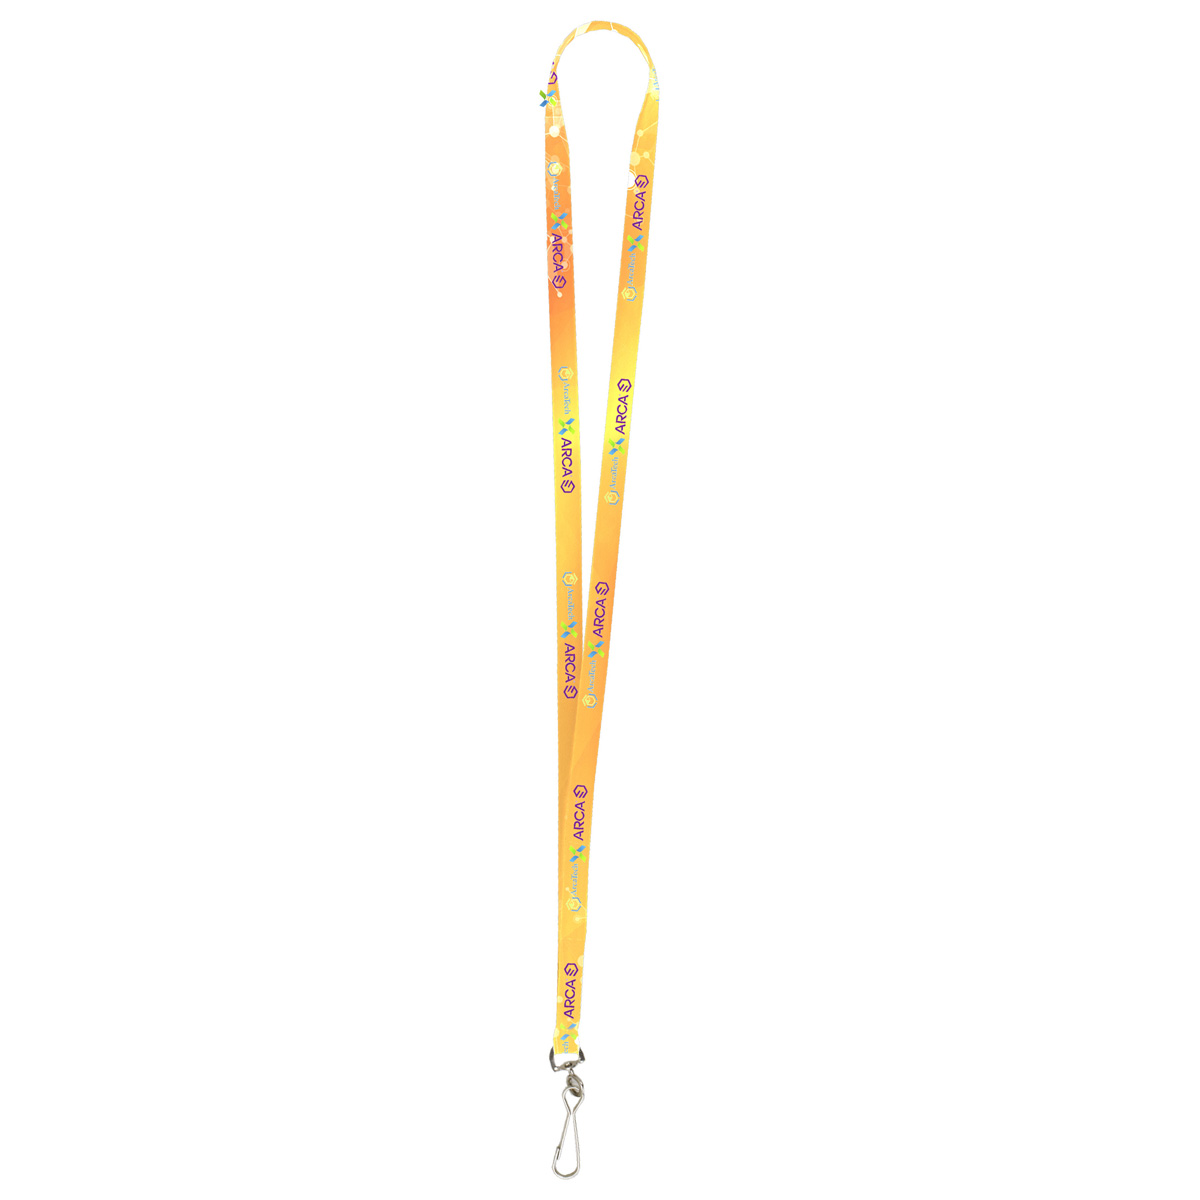 "PALMER" 3/8” Import Air Ship Super Soft Polyester Multi-Color Sublimation Lanyard